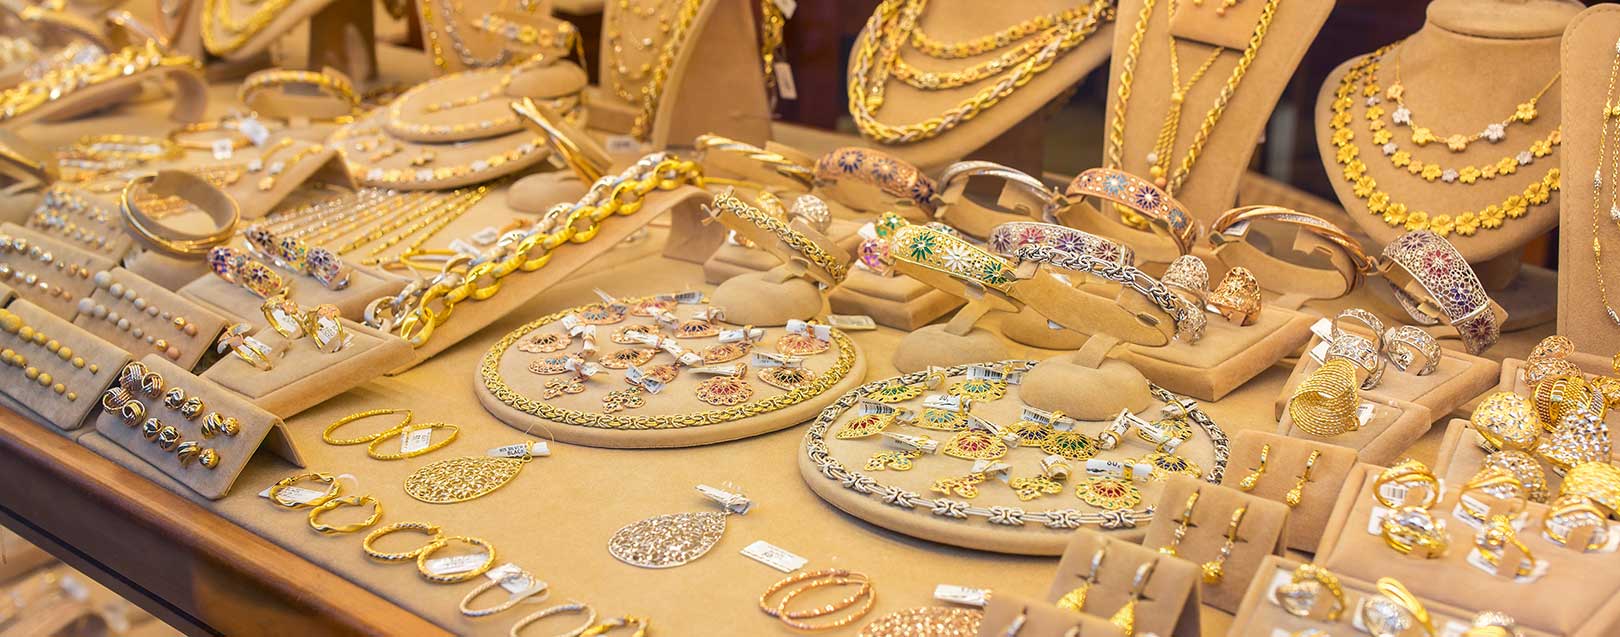 Gems and jewellery exports decline by 4.65% in Apr-Dec FY’18